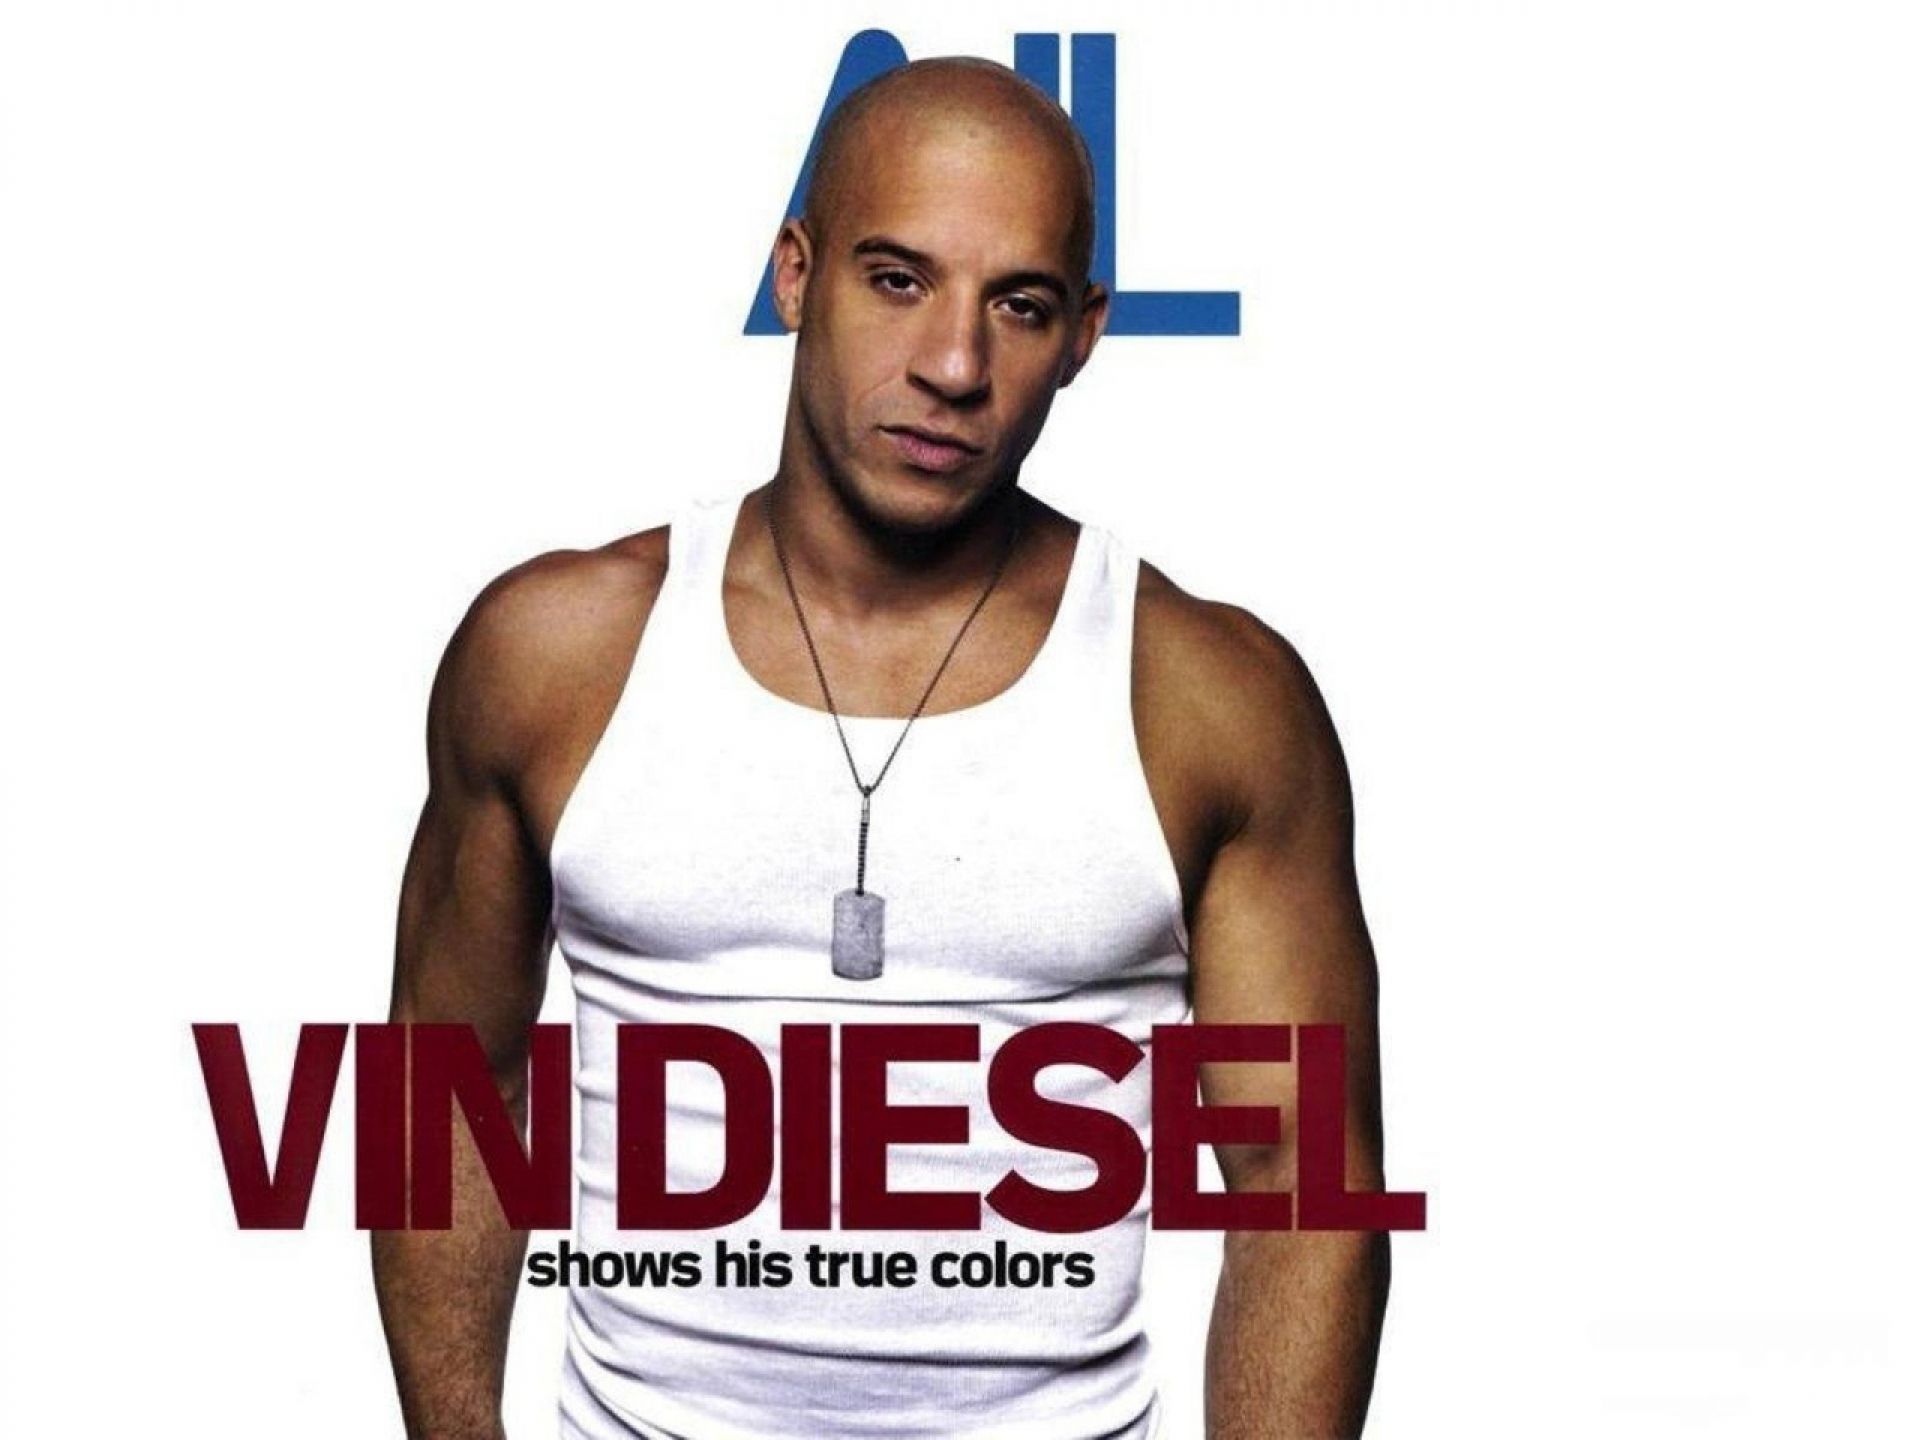 Vin Diesel shows his true colors wallpapers and images ...